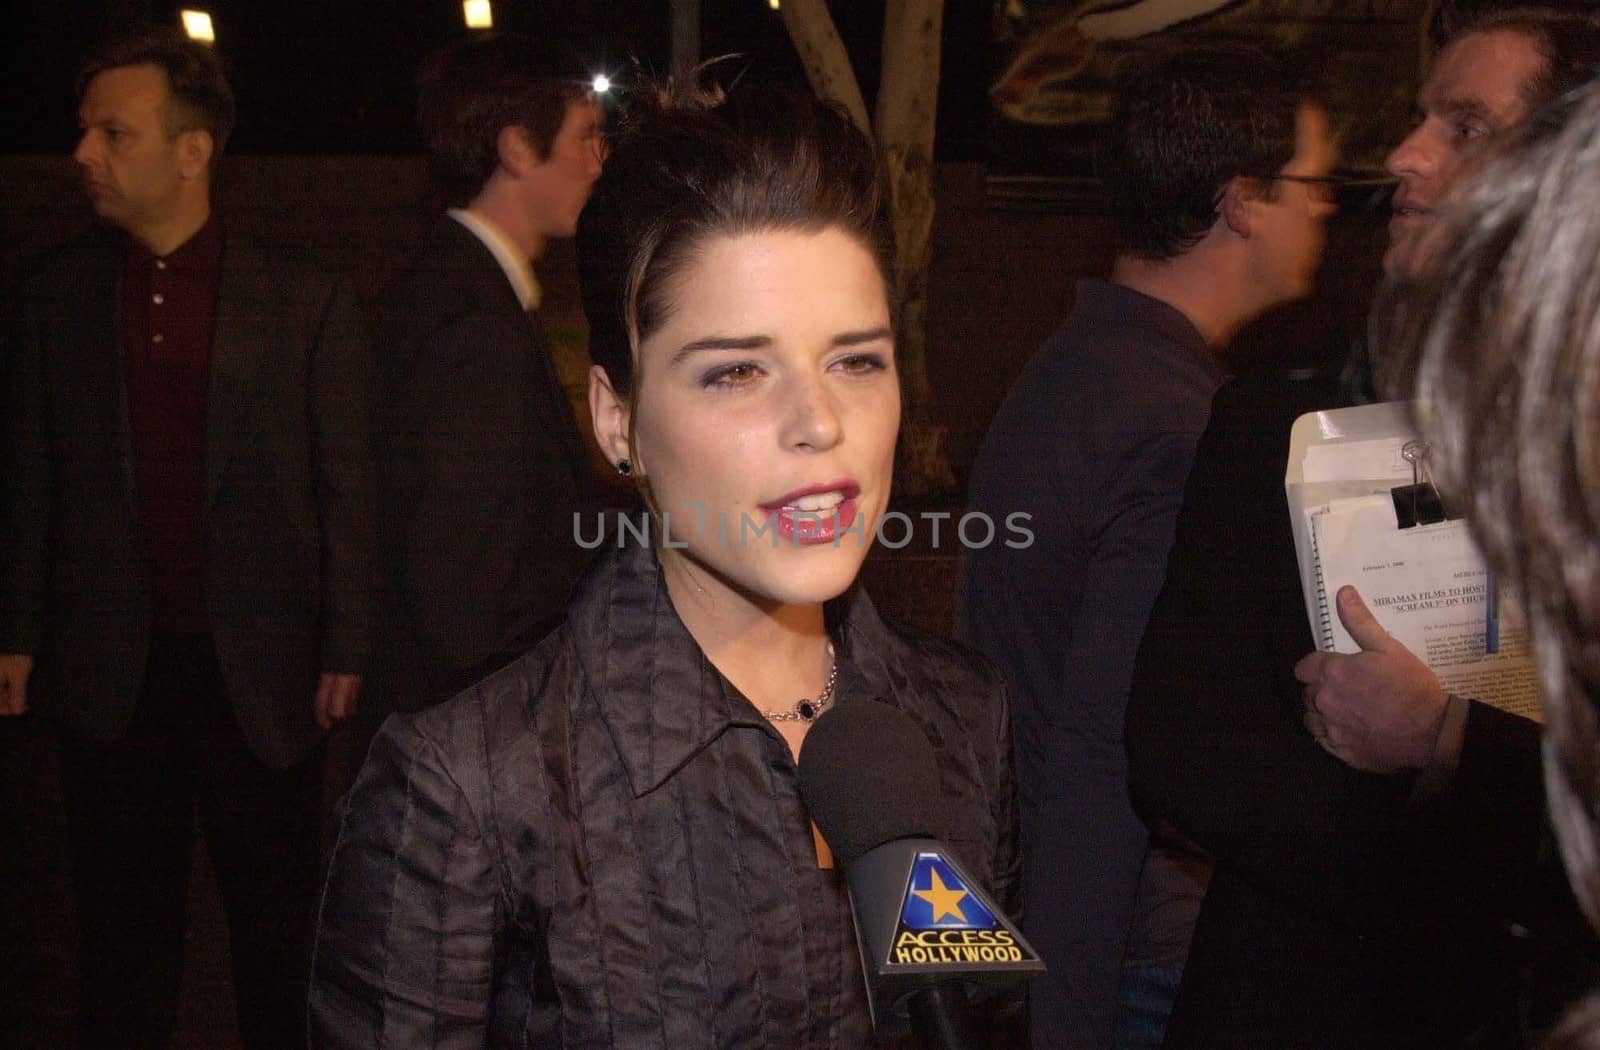 Neve Campbell at the premiere of Dimension Film's "Scream 3" in Westwood, 02-02-00